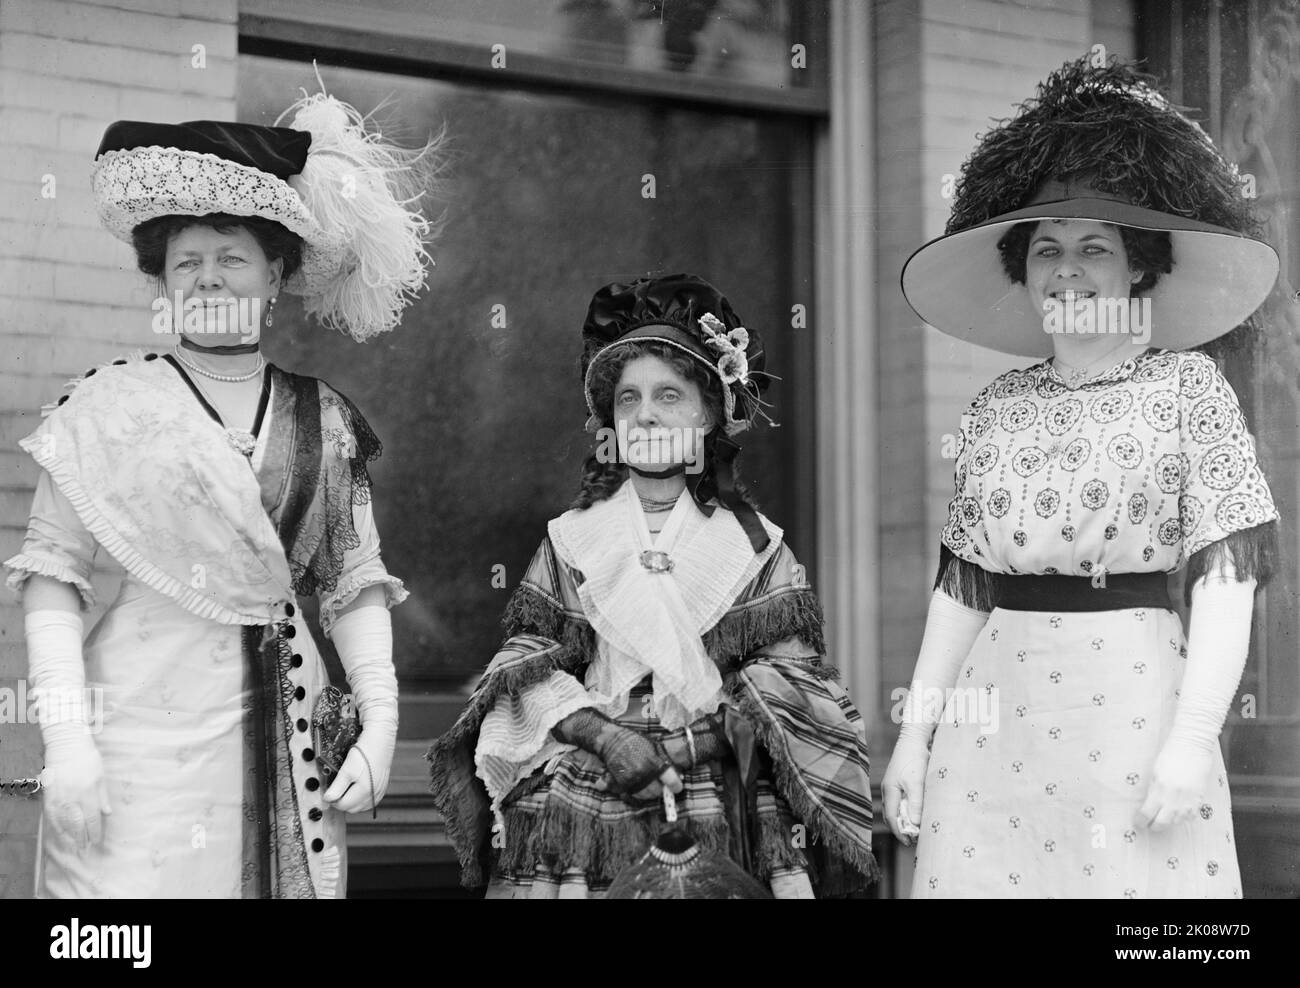 Dolly Madison Breakfast - Mrs. William F. Dennis; Mrs. Chase Riker; Mrs. Mann Barker, 1912. Society occasion, USA. Wives of influential men - the older woman is wearing late 19th century bonnet and dress while her companions wear wide-brimmed hats. Stock Photo